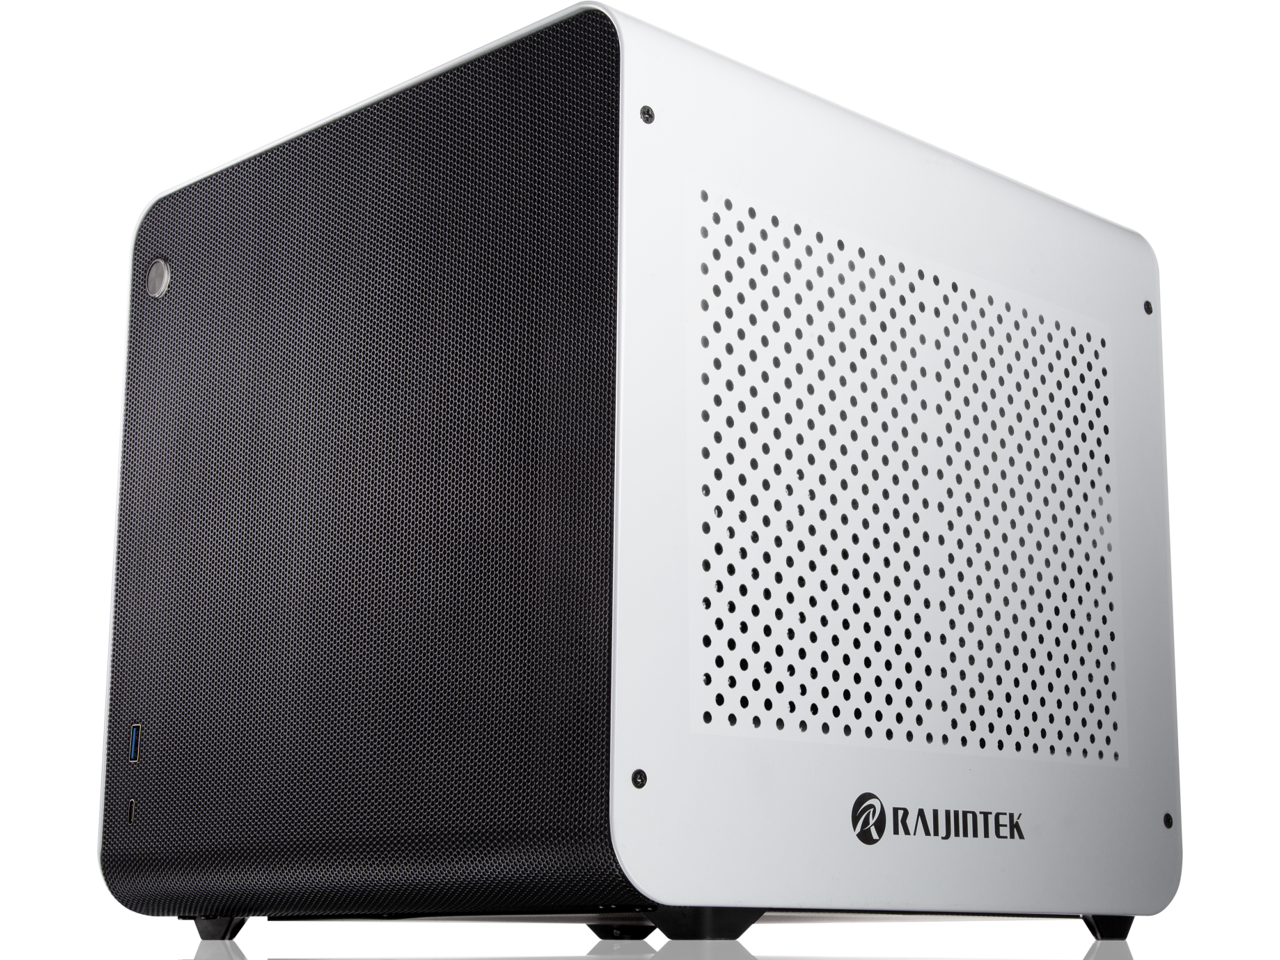 METIS EVO WHITE ALS, an Alu. ITX case with solid panel, is designed to fulfill the smallest case built with ultra high air flow to solve all thermal issue of SFF chassis, 200mm fan option at front.